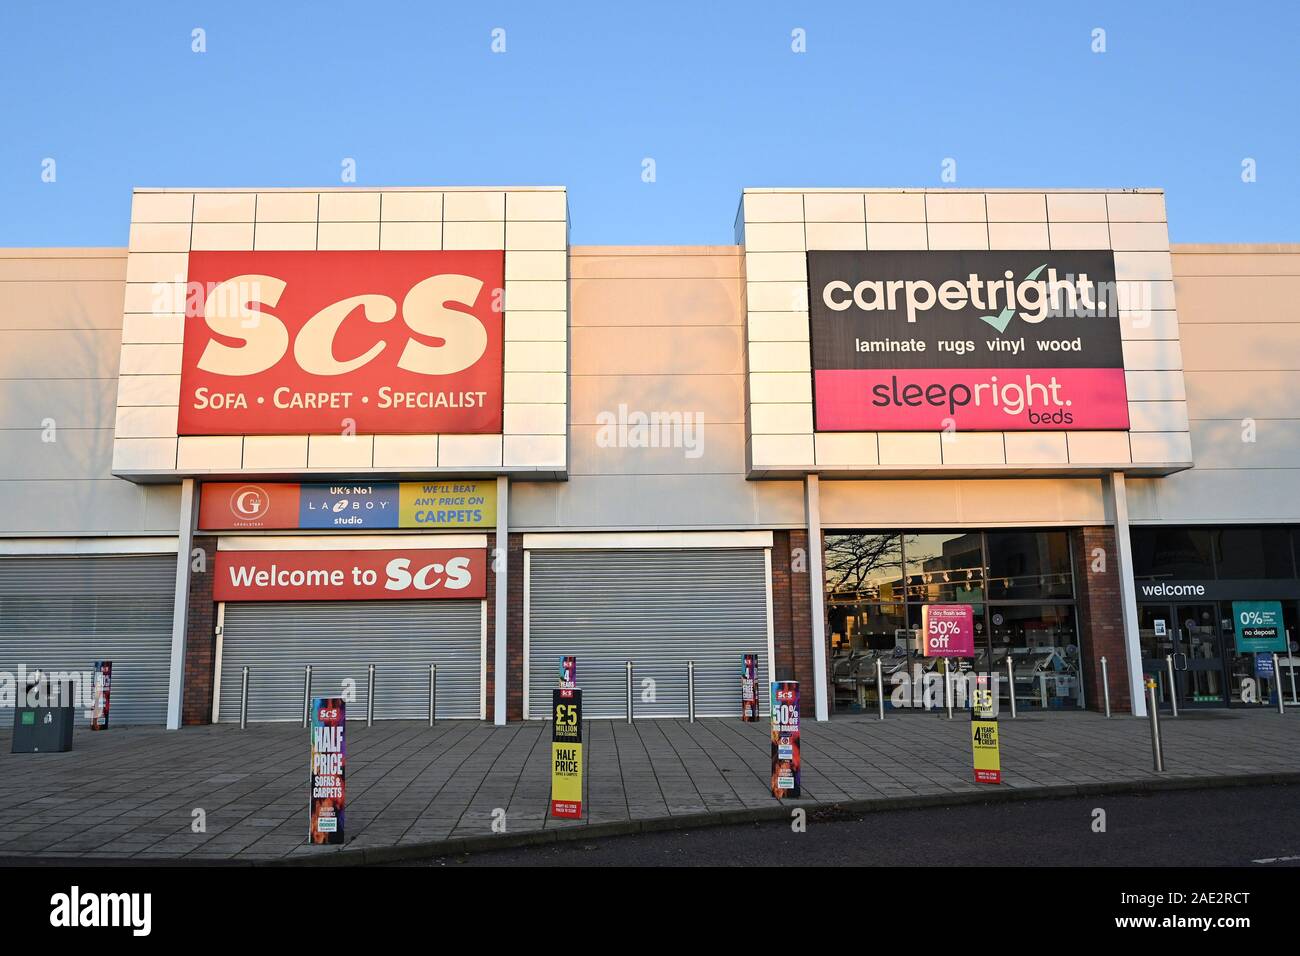 Carpetright Shop Front High Resolution Stock Photography And Images Alamy